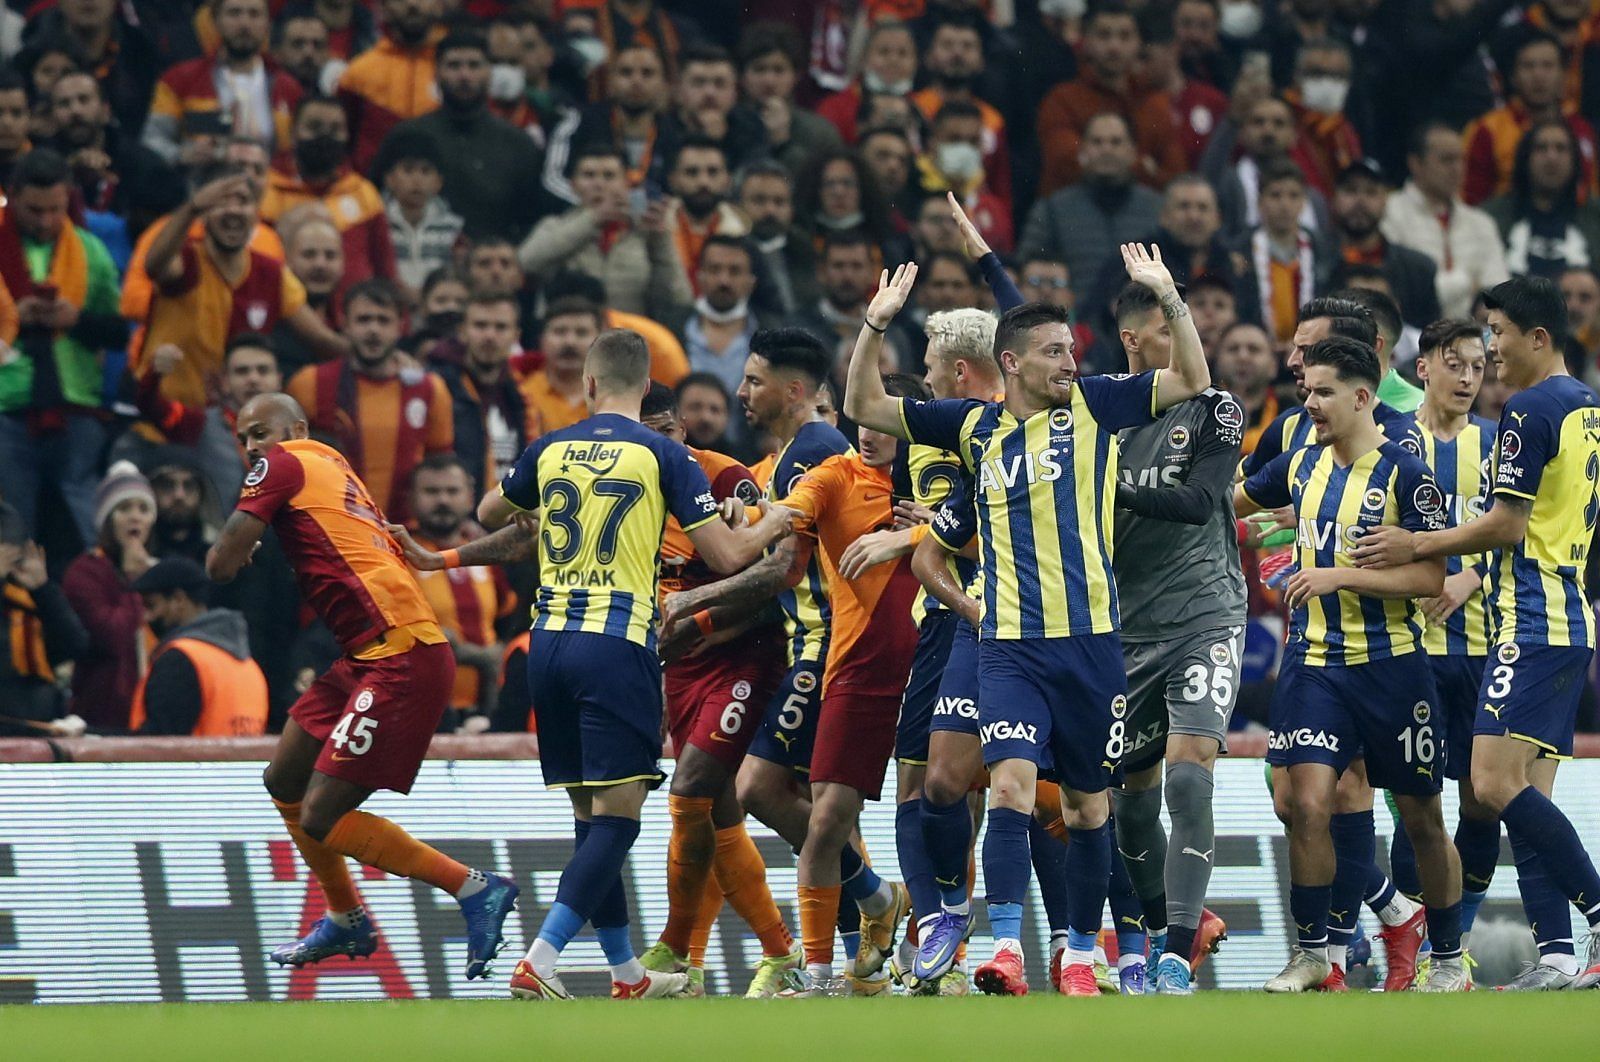 Fenerbahce square off against arch-rivals Galatasaray on Sunday